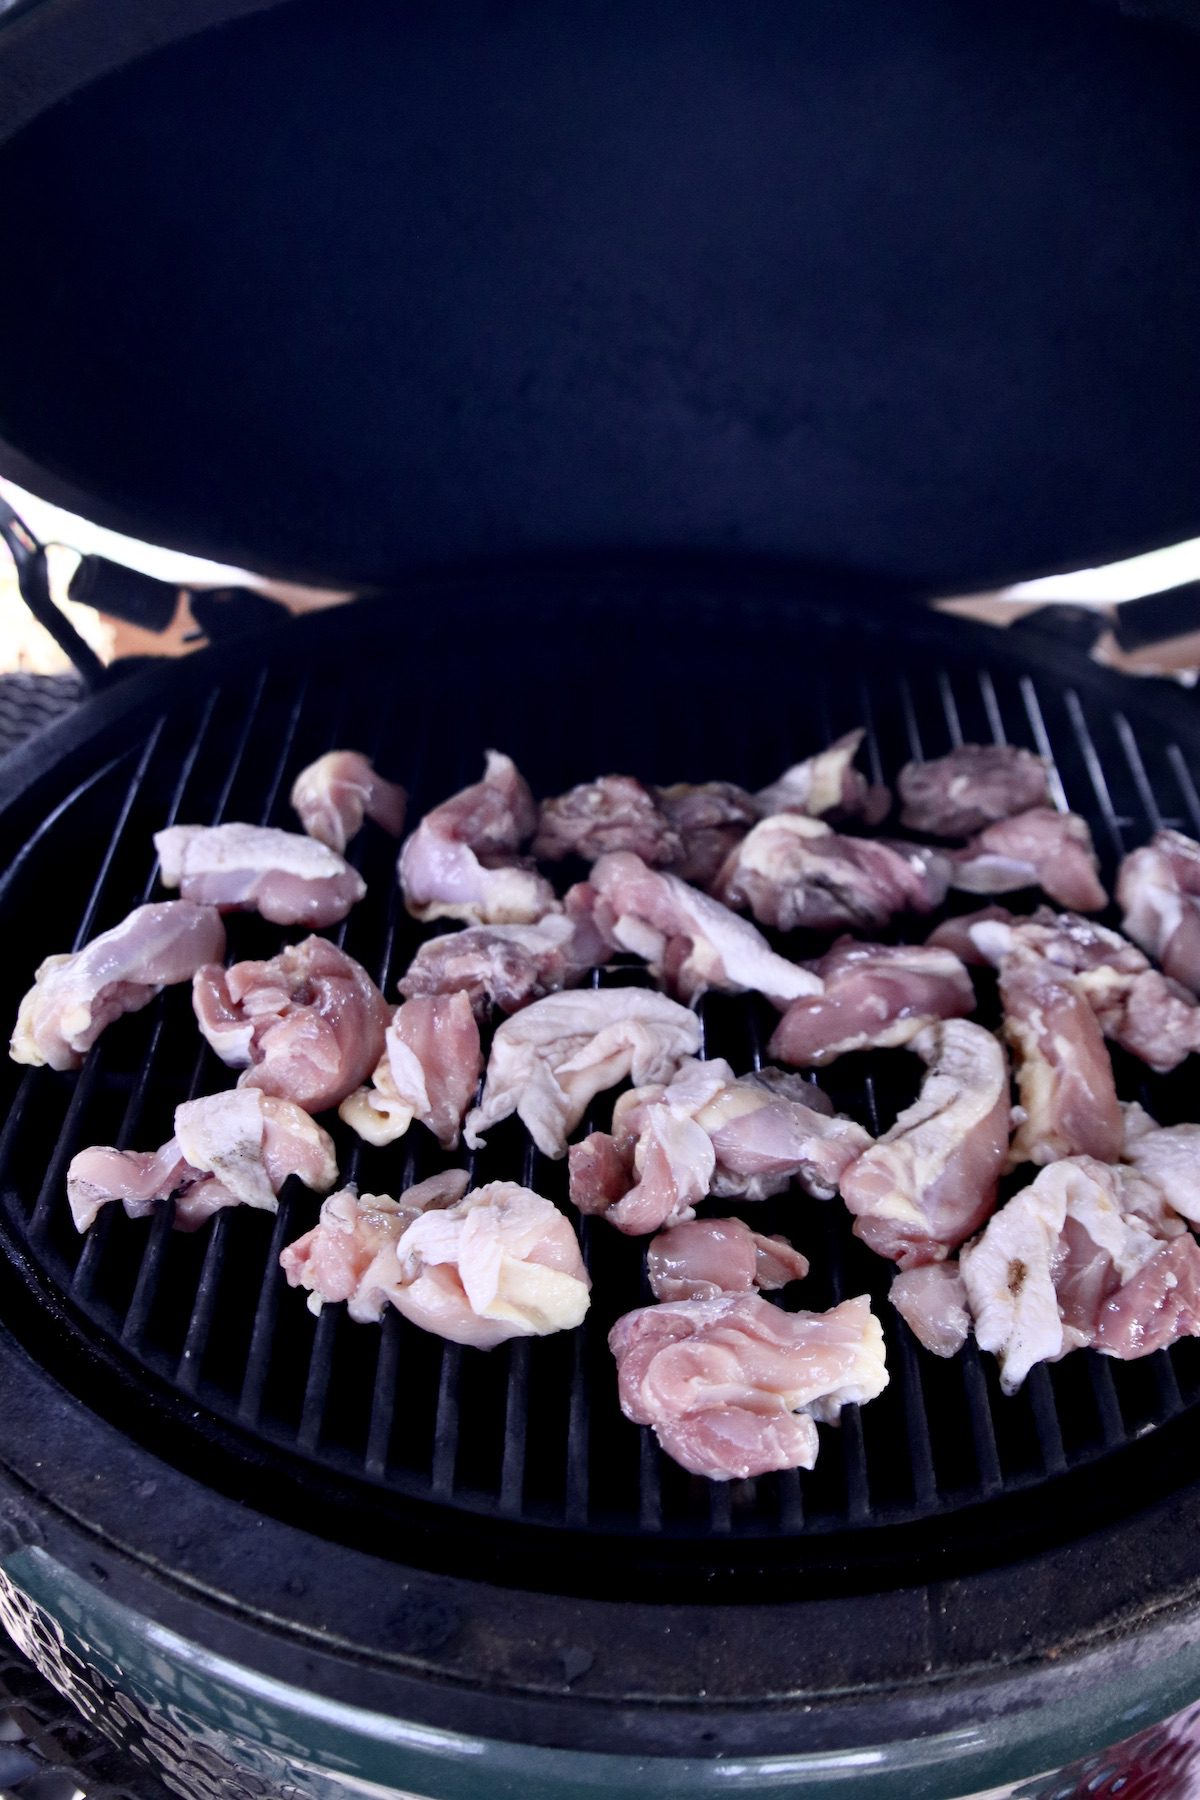 chicken pieces on a grill